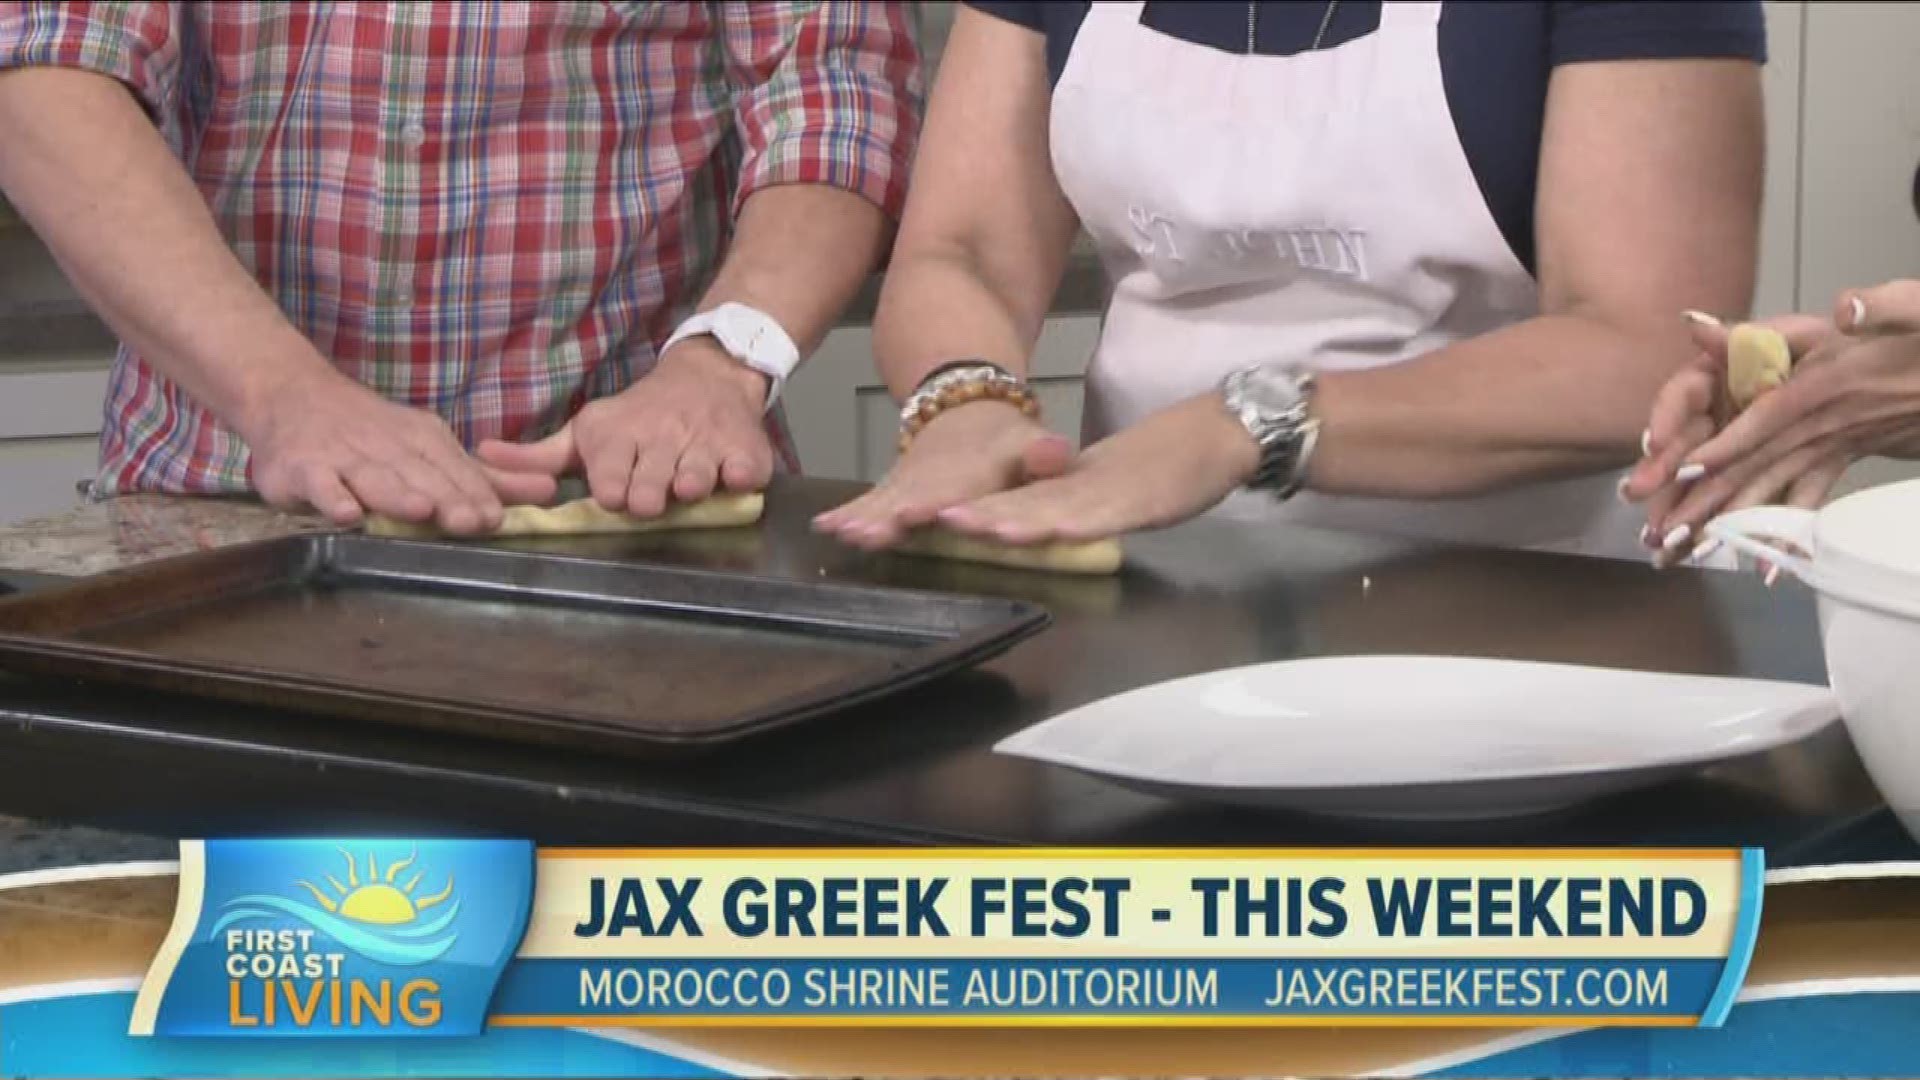 Here's what you need to know about the Jacksonville Greek Festival.